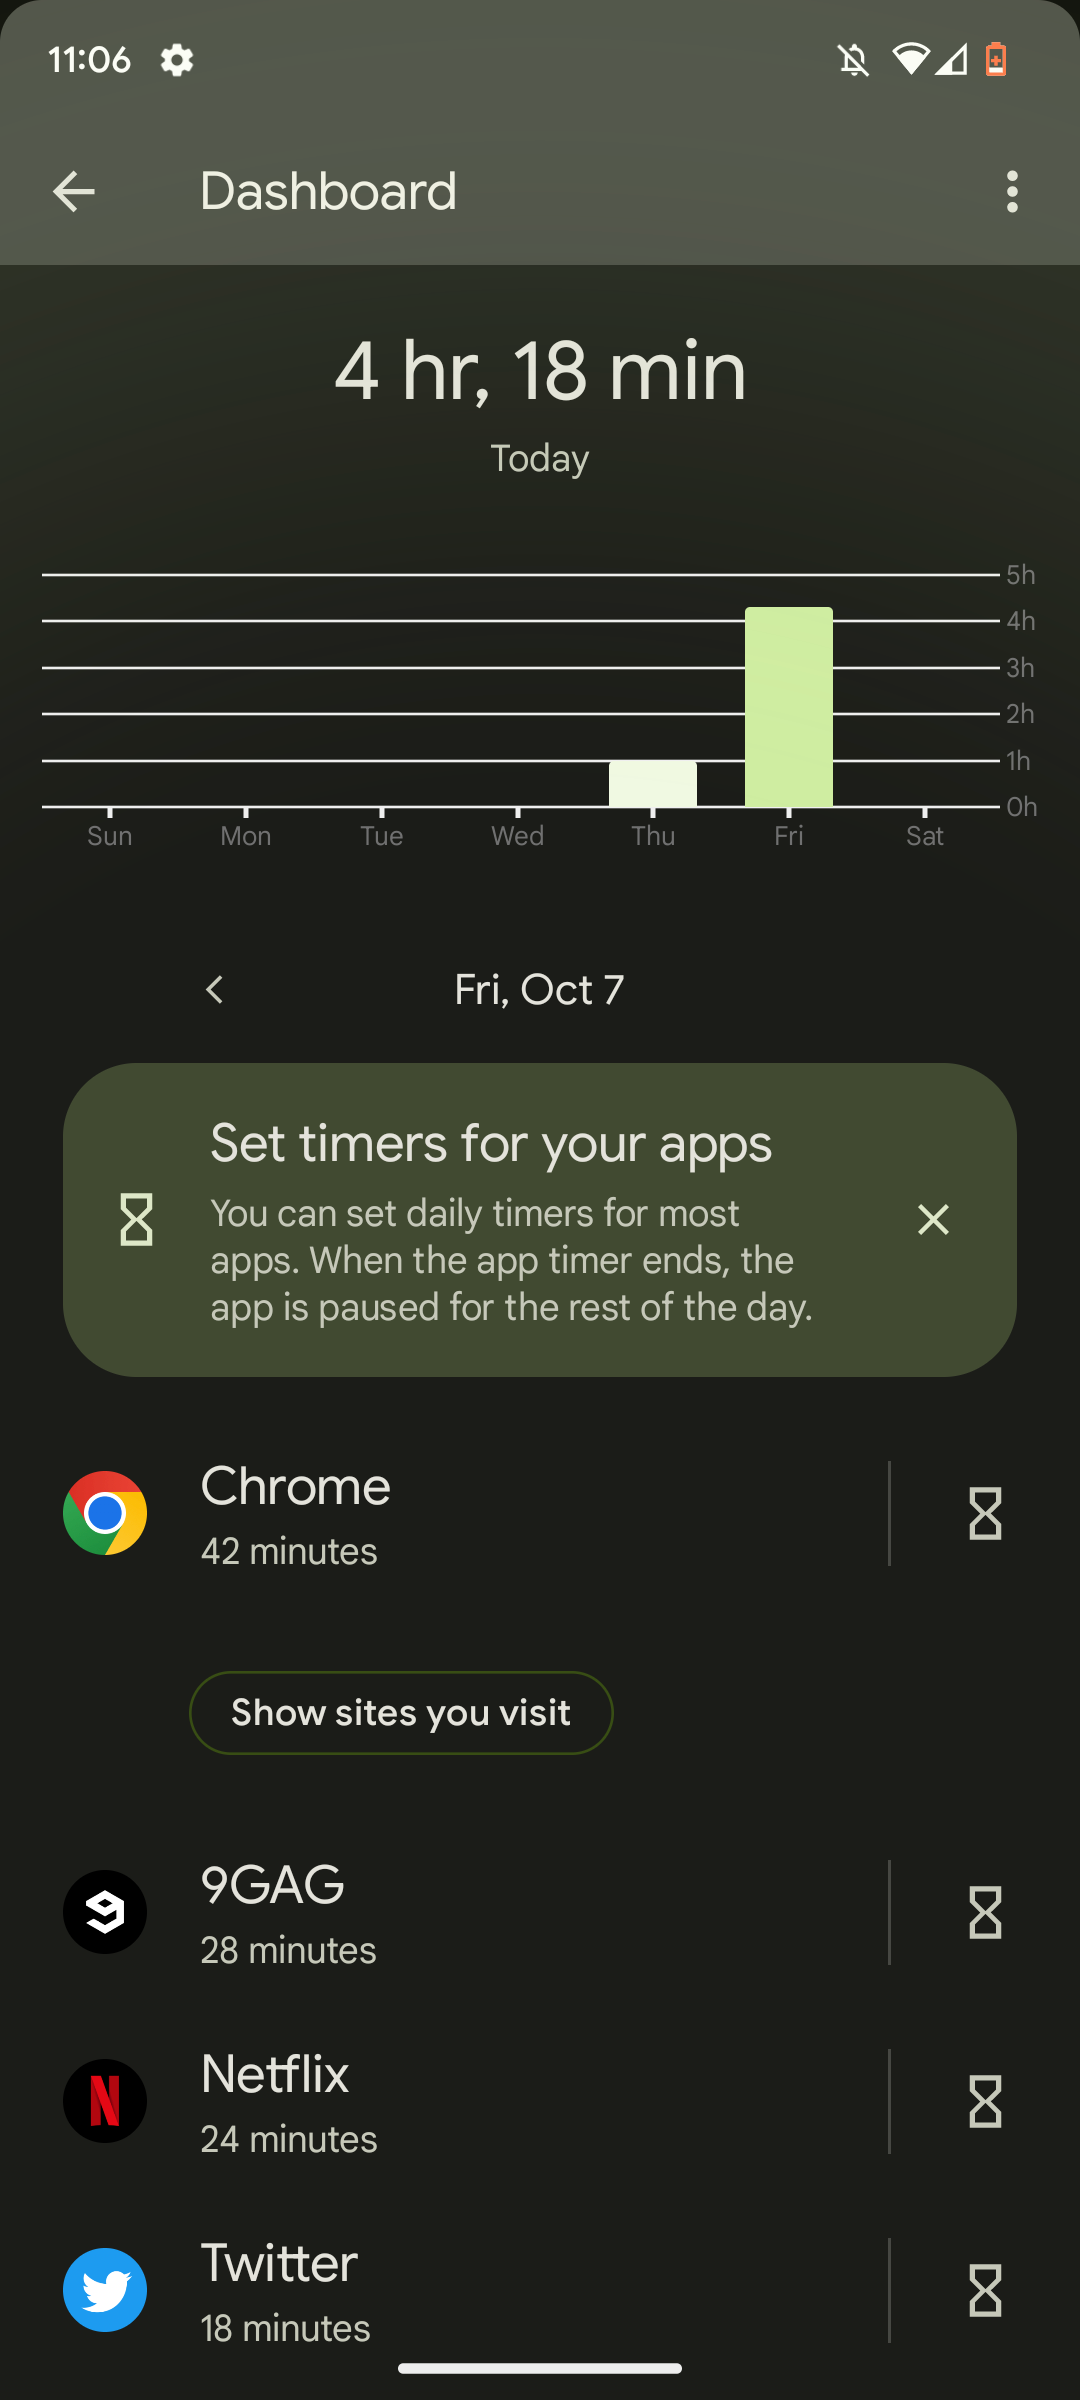 Screenshot of the Google Pixel 7's Digital Wellbeing dashboard, showing 4 hours and 18 minutes of screen time